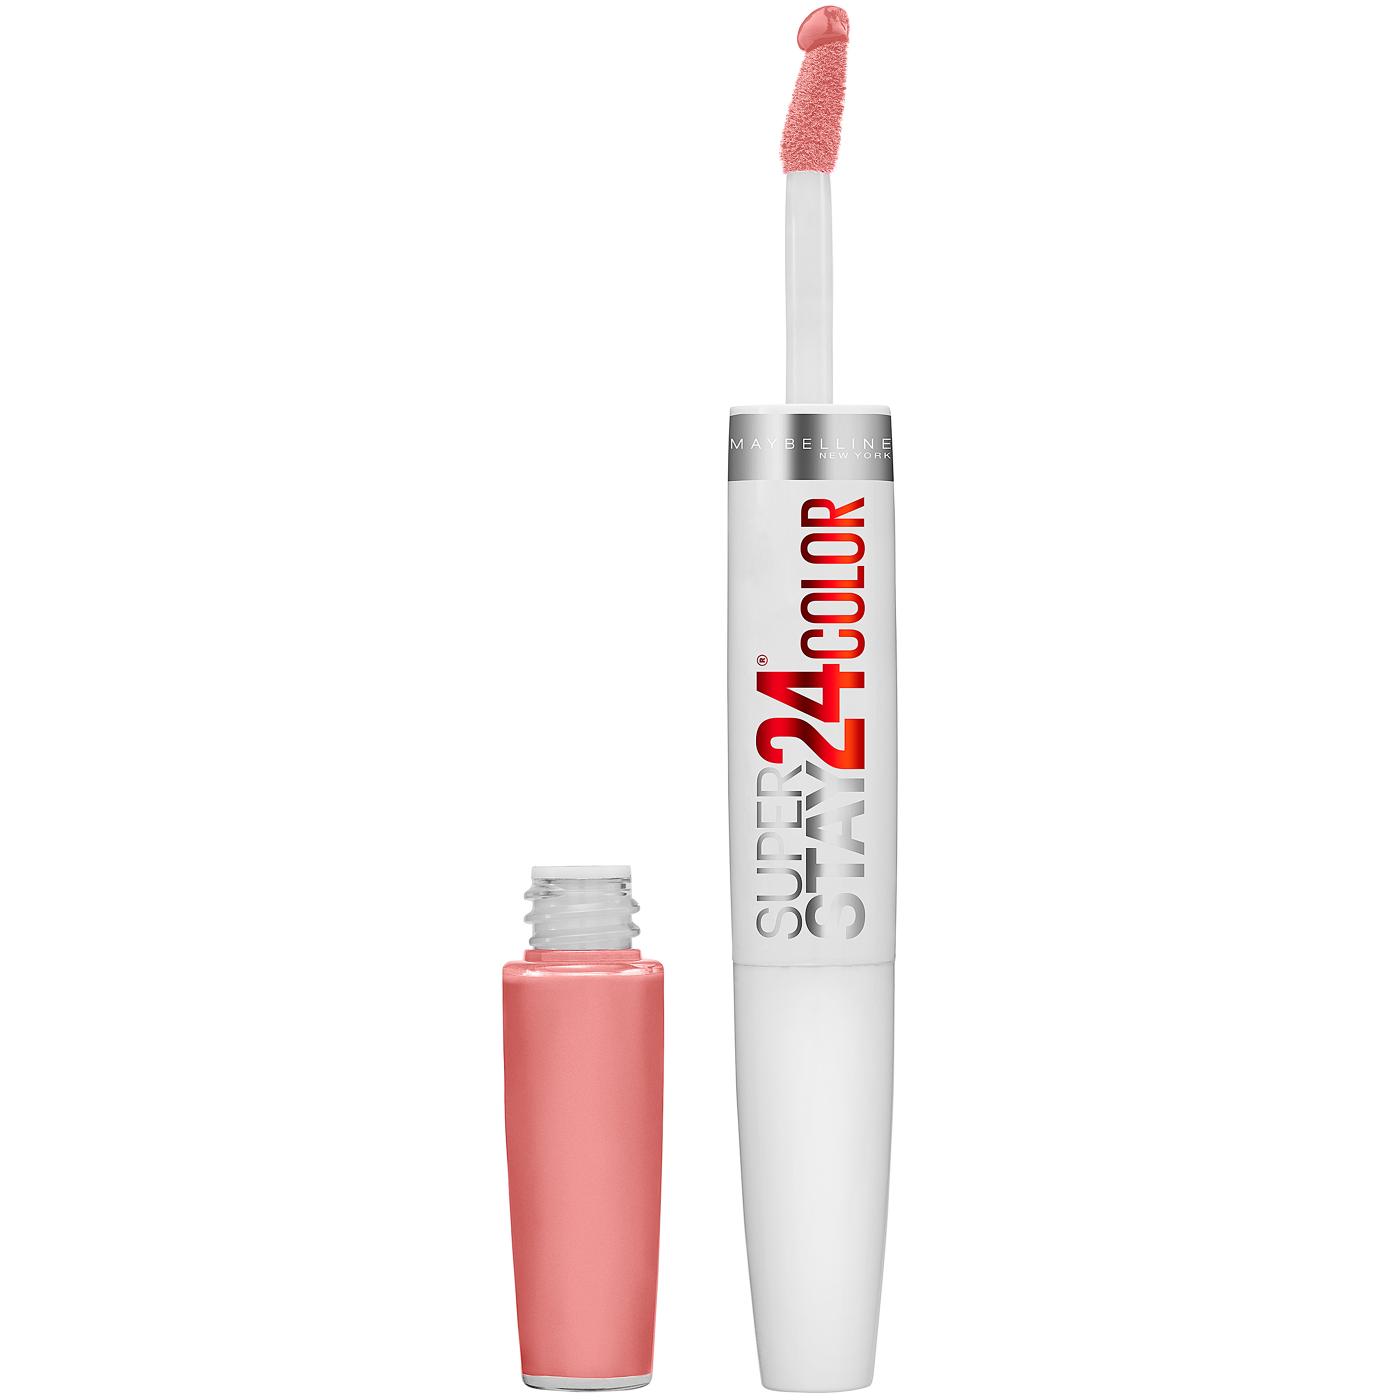 Maybelline Super Stay 24 2-Step Liquid Lipstick - All Night Apricot; image 1 of 5